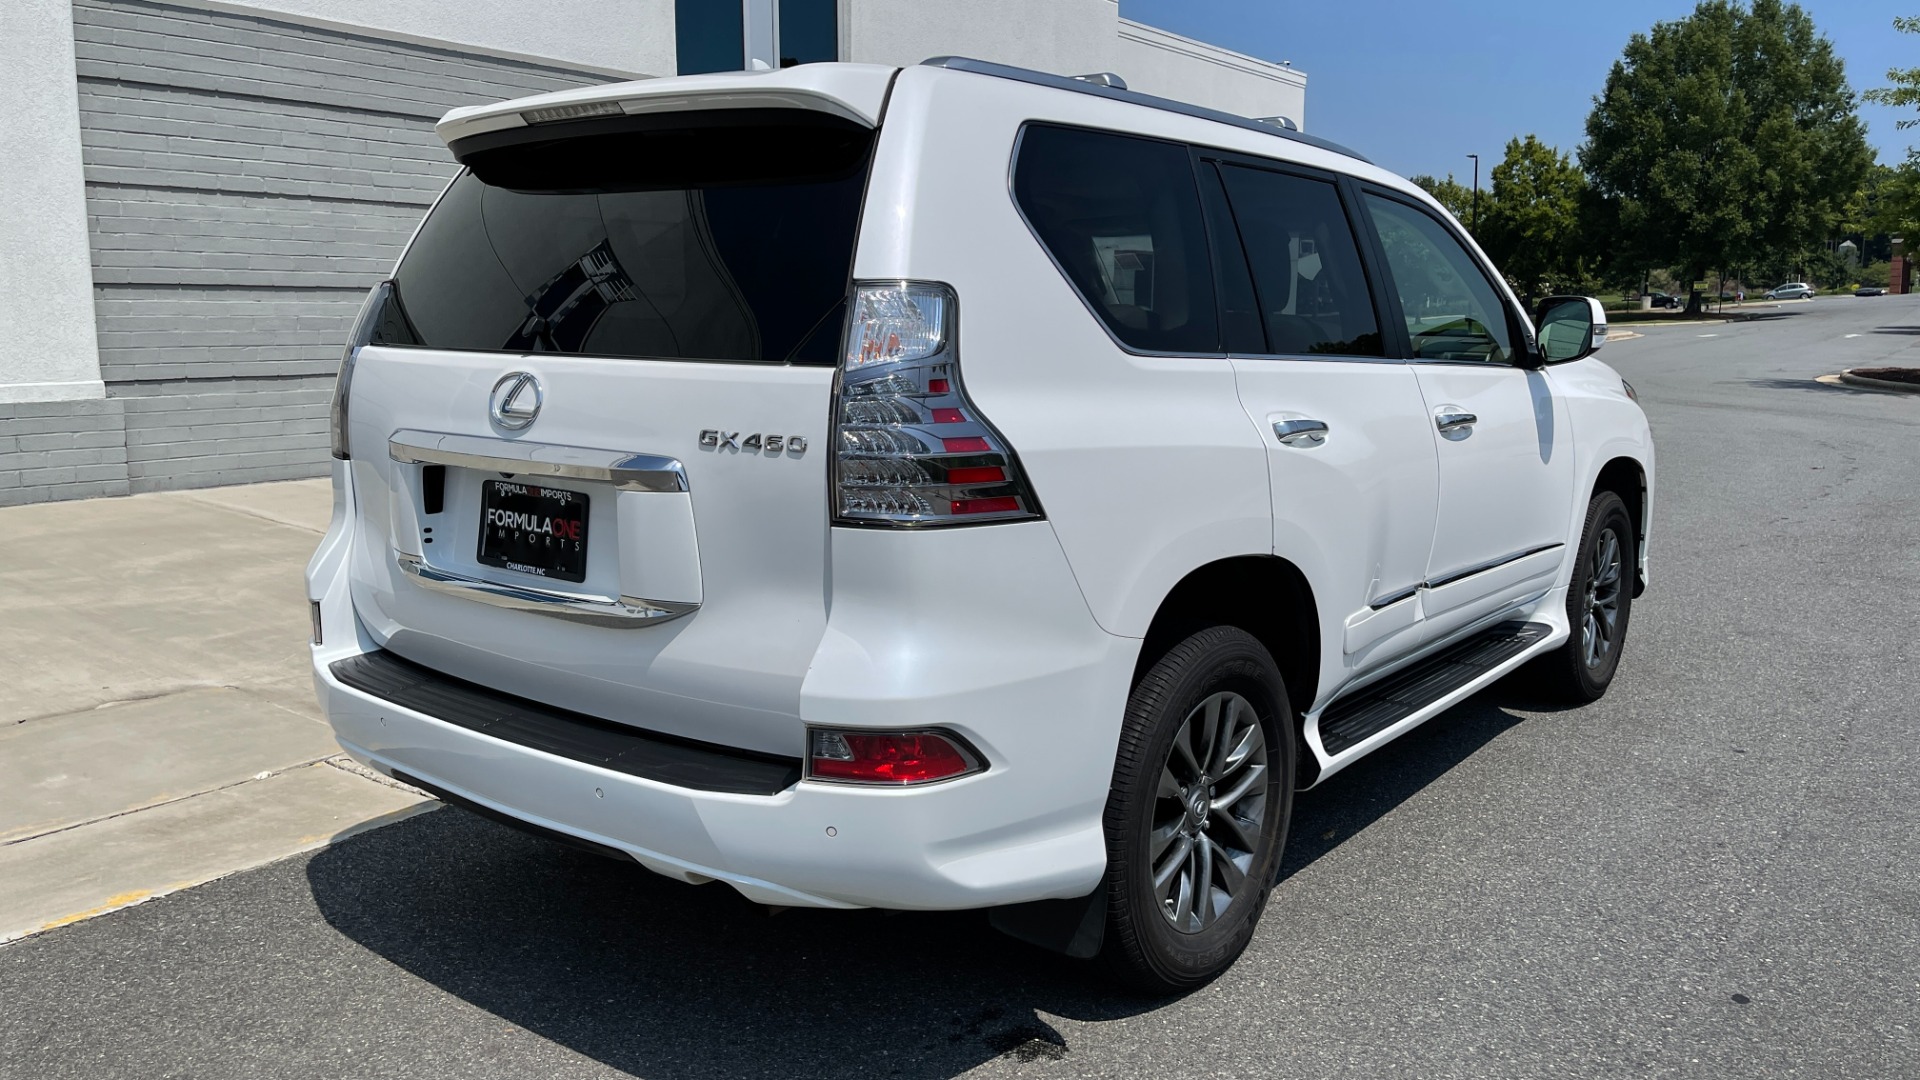 Used 2015 Lexus GX 460 LUXURY / 4.6L V8 / 4WD / NAV / SUNROOF / 3-ROW / REARVIEW for sale Sold at Formula Imports in Charlotte NC 28227 2